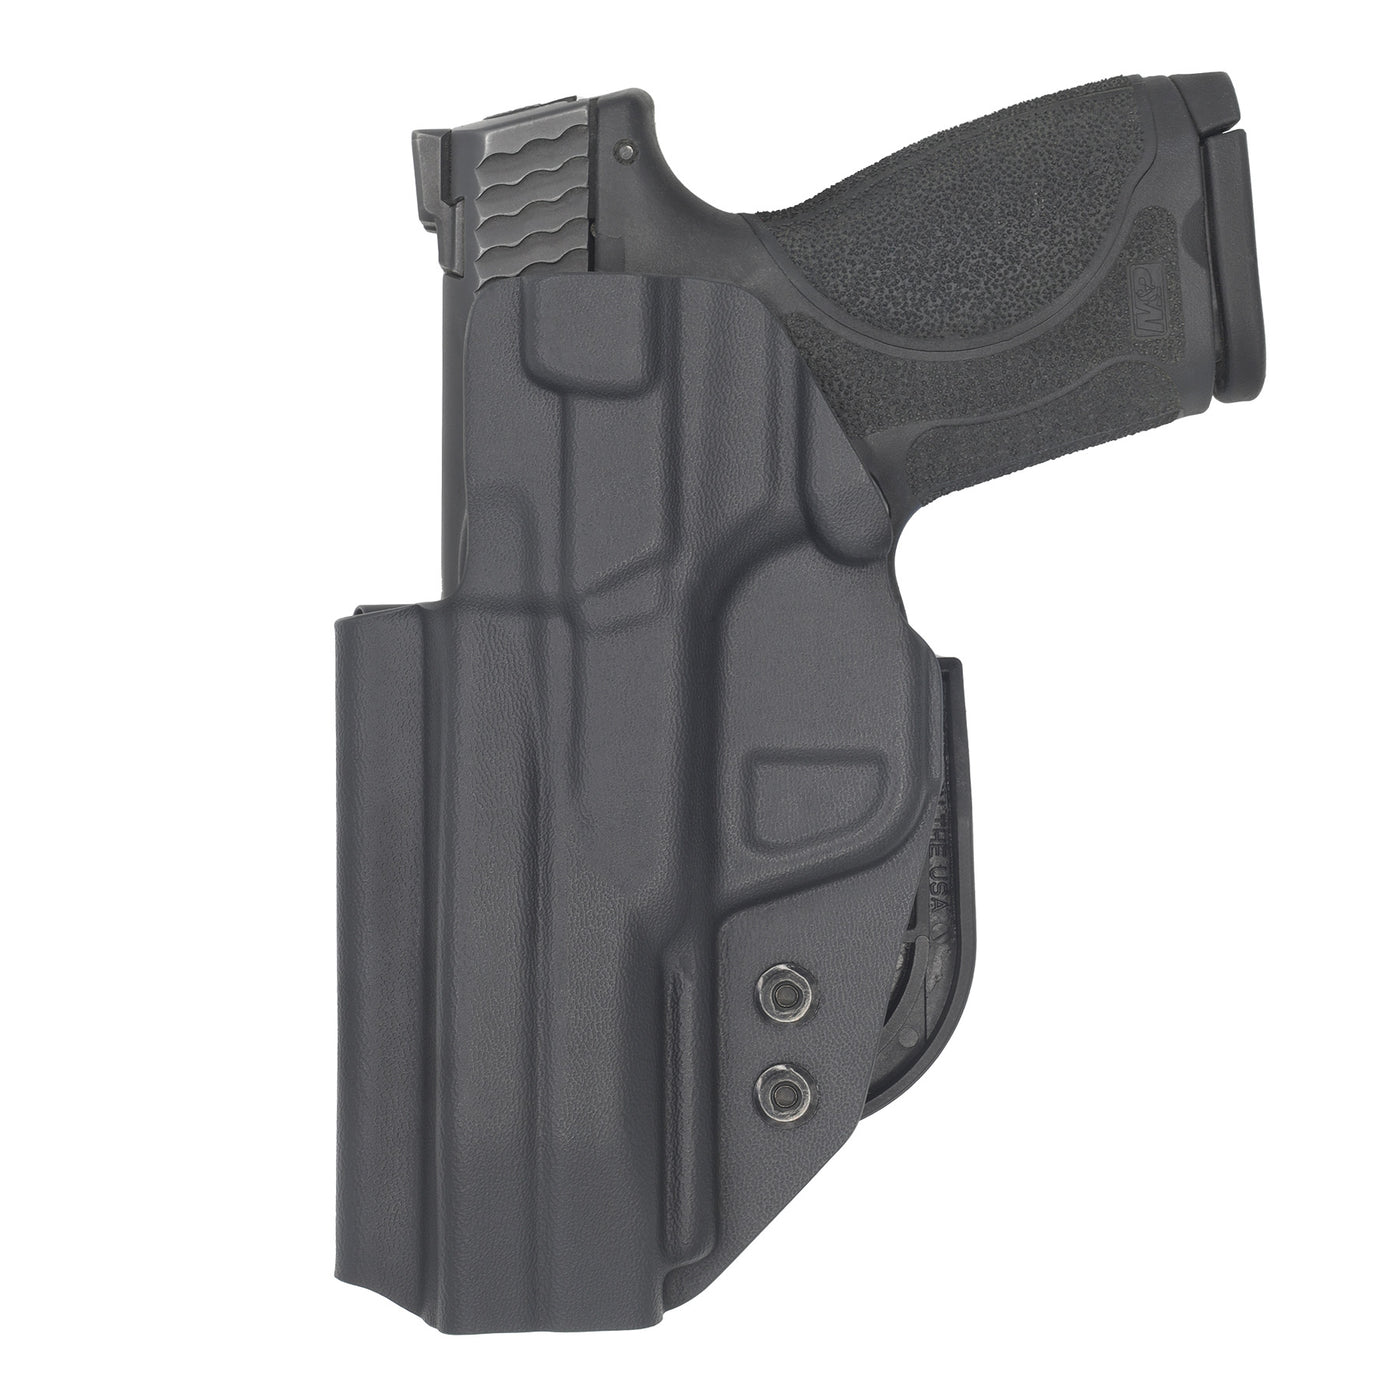 C&G Holsters quickship IWB ALPHA UPGRADE Covert M&P 9/40 3.6" back view